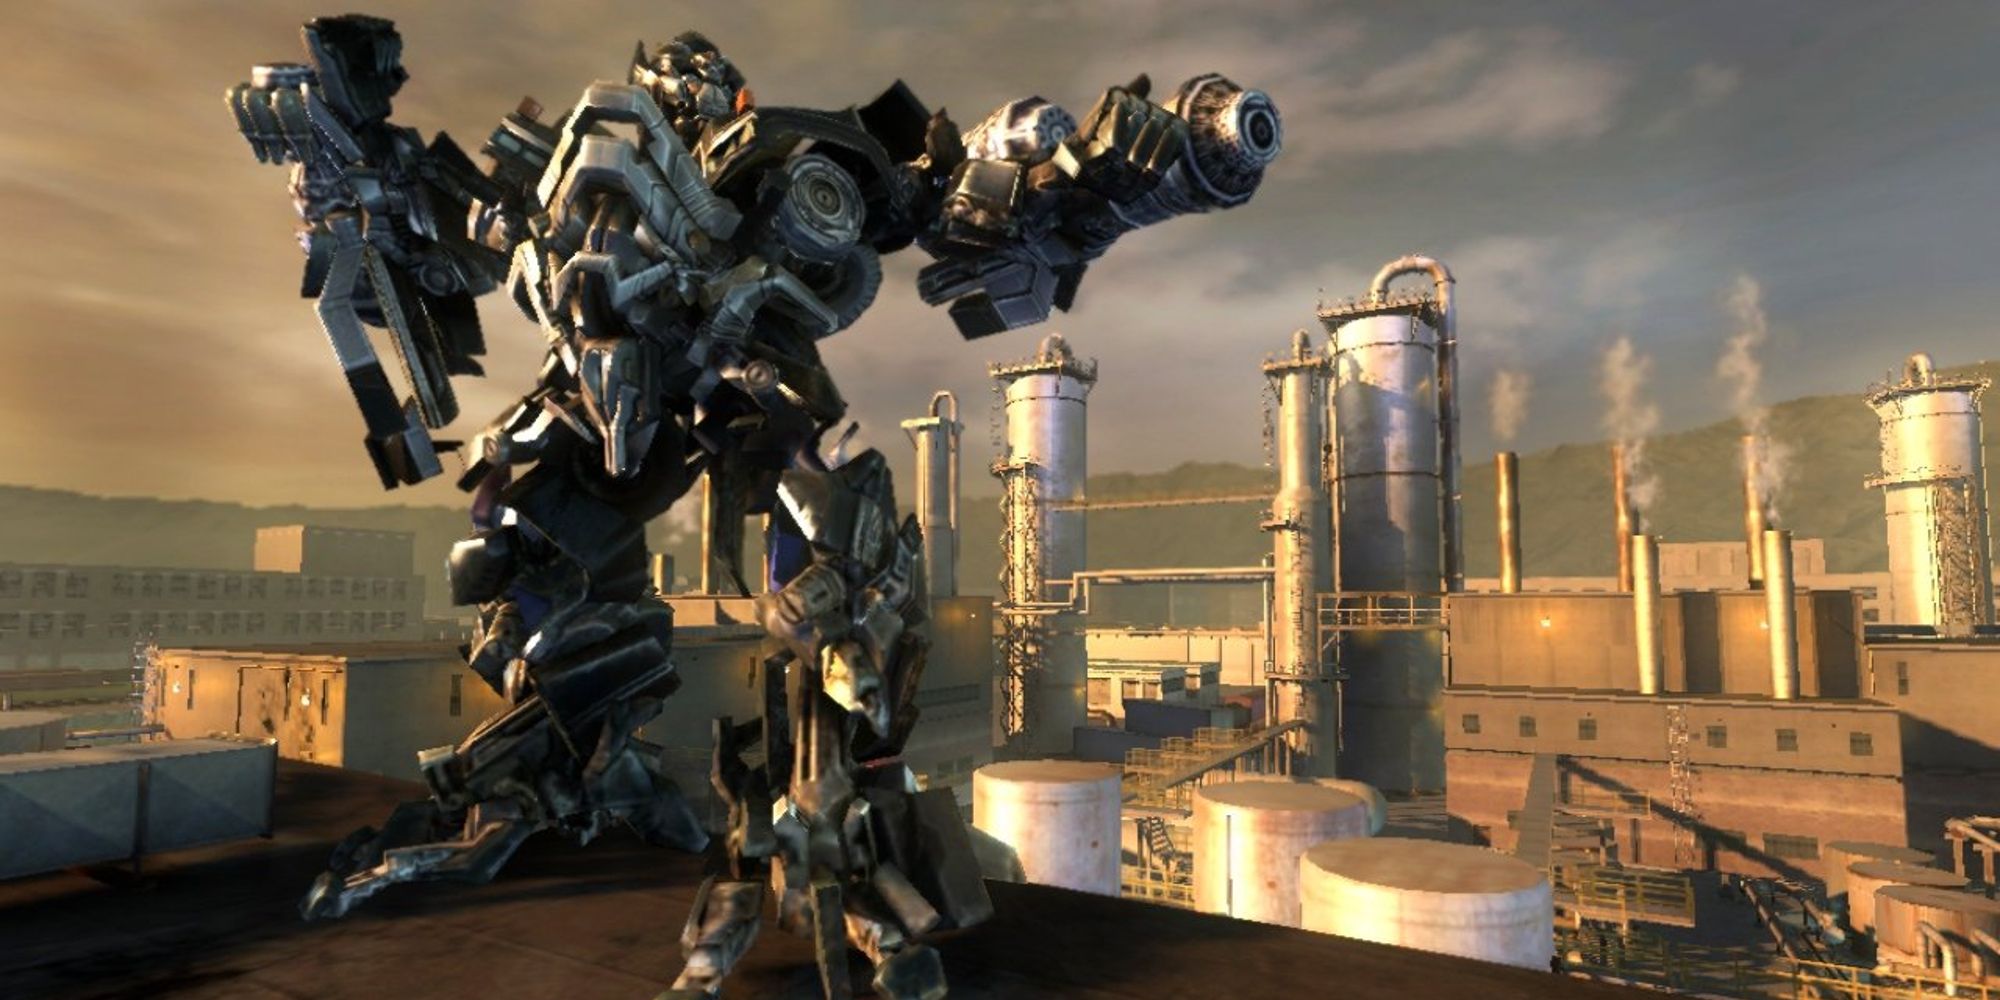 Ironhide aiming his arm cannons in gameplay for Transformers Revenge Of The Fallen game